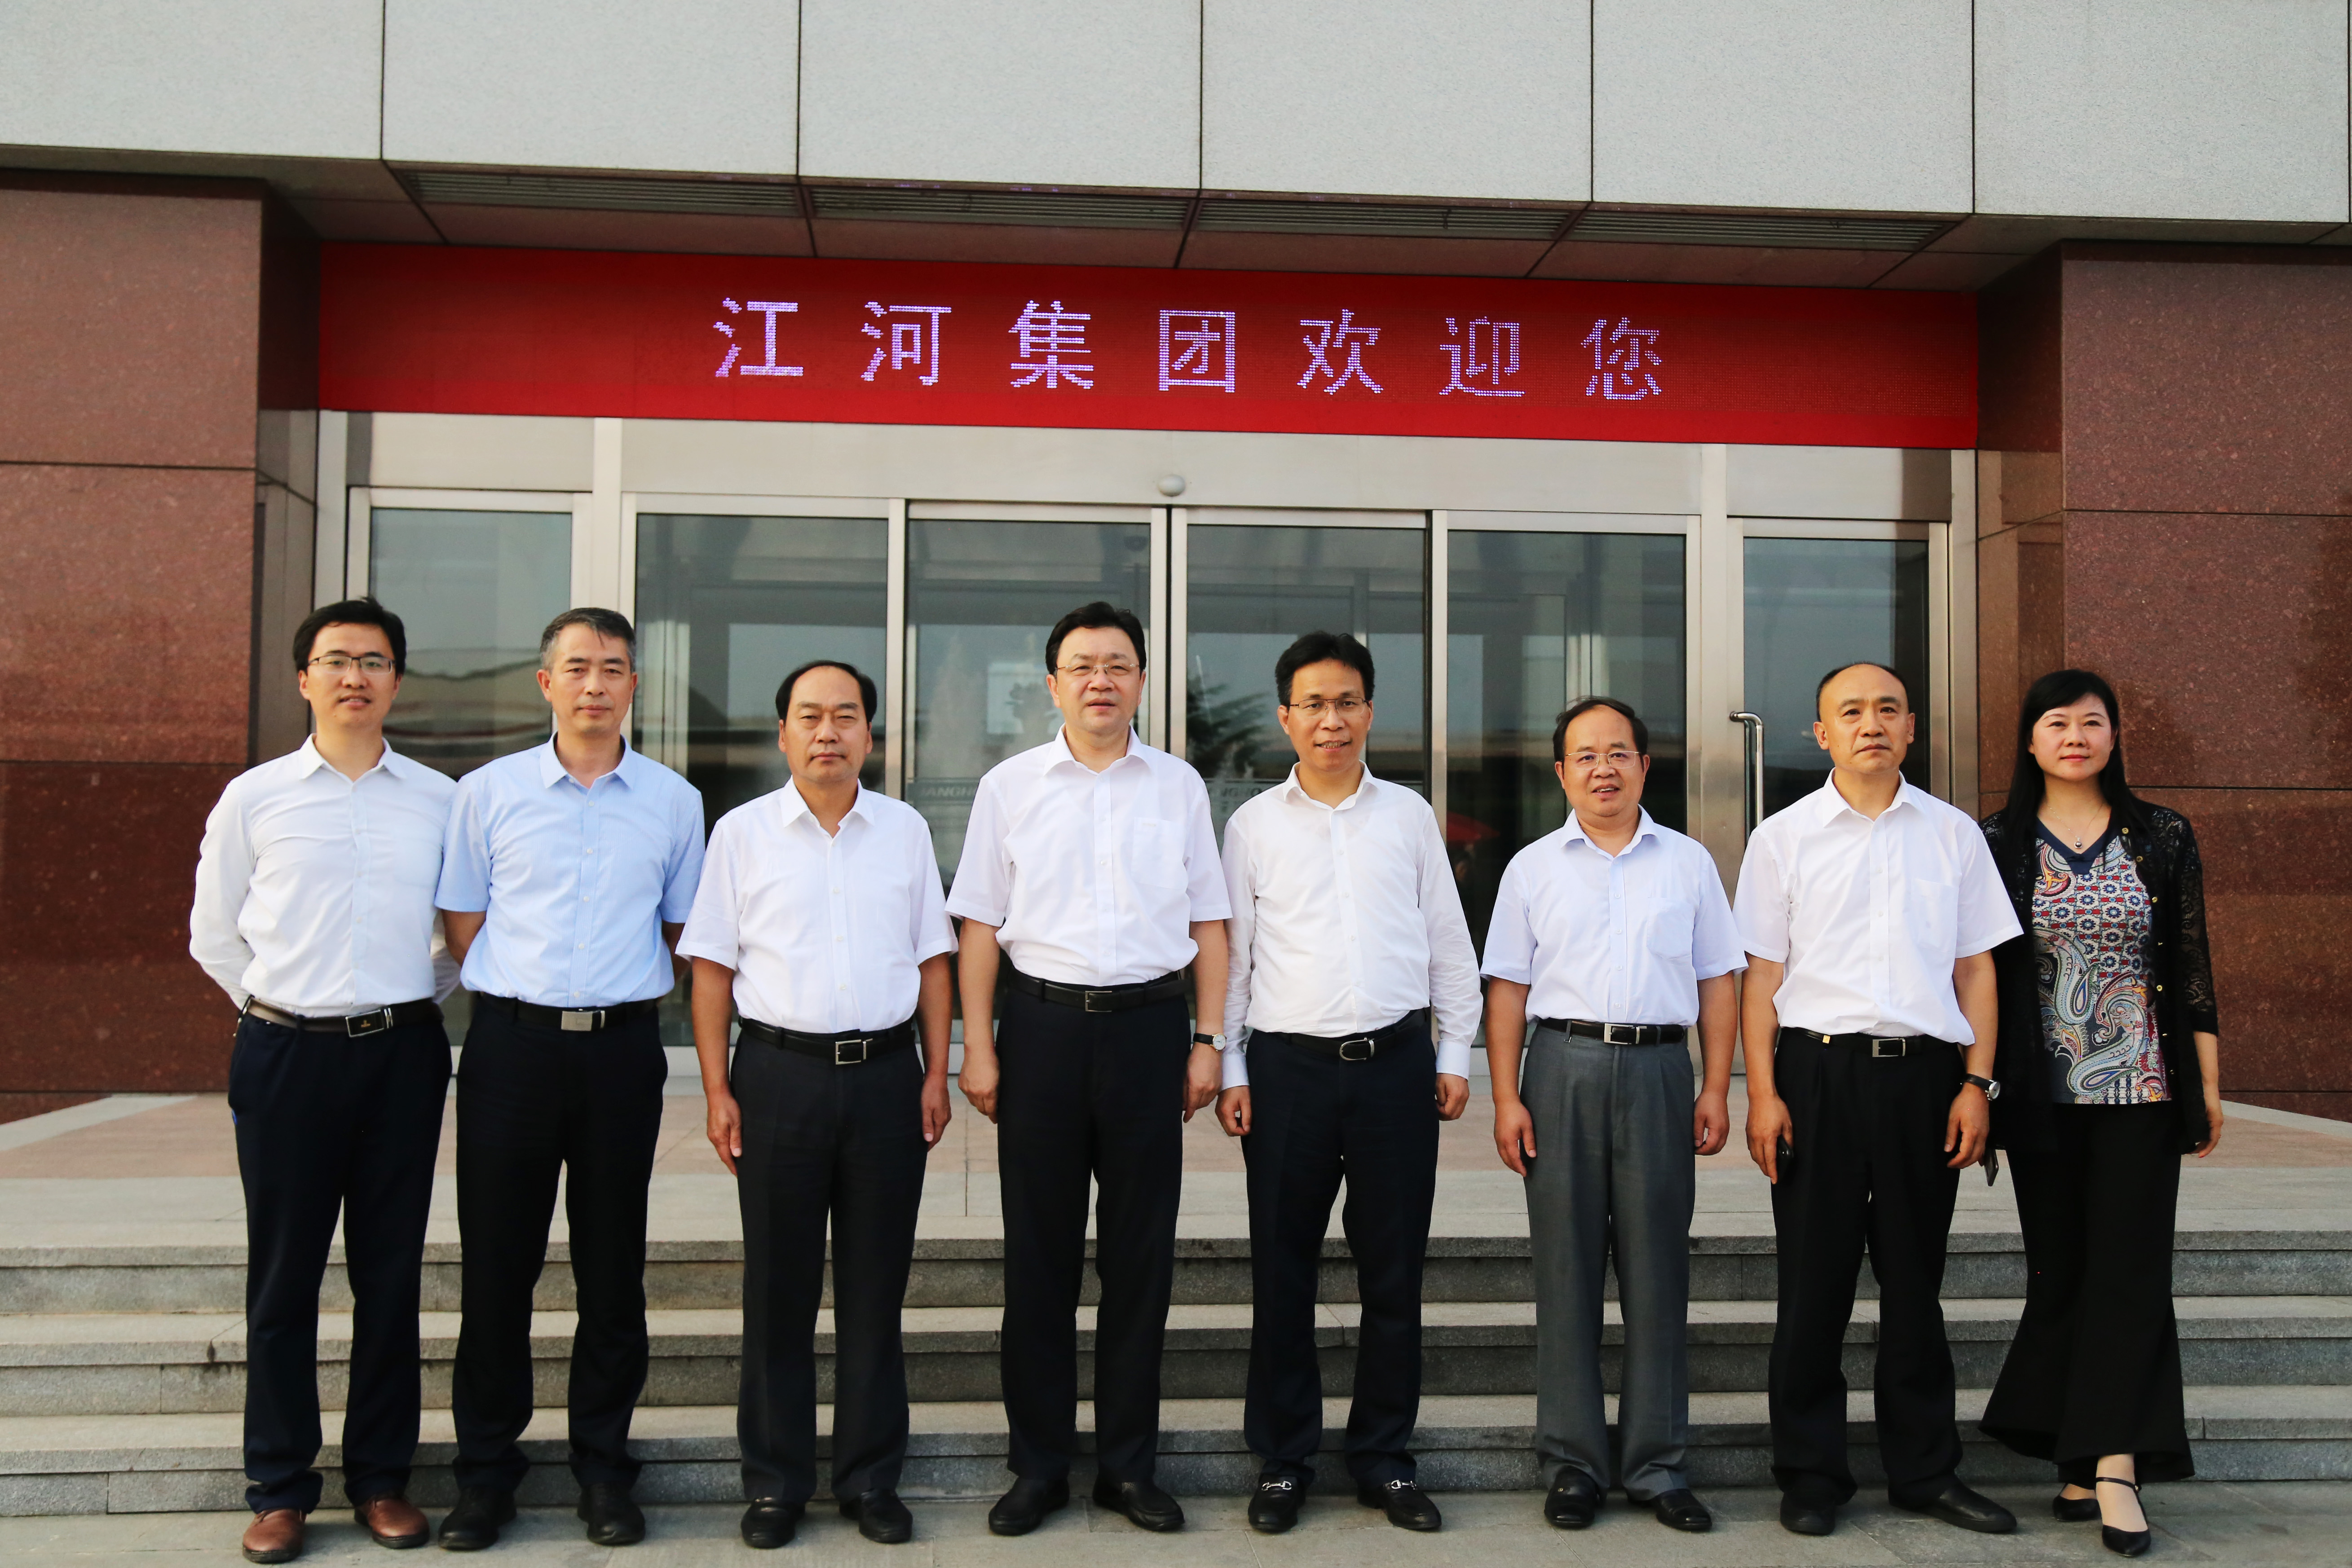 Yang Yue, Member of the Standing Party of Jiangsu Provincial Party Committee, Paid a Visit to the Headquarters of Jangho Group